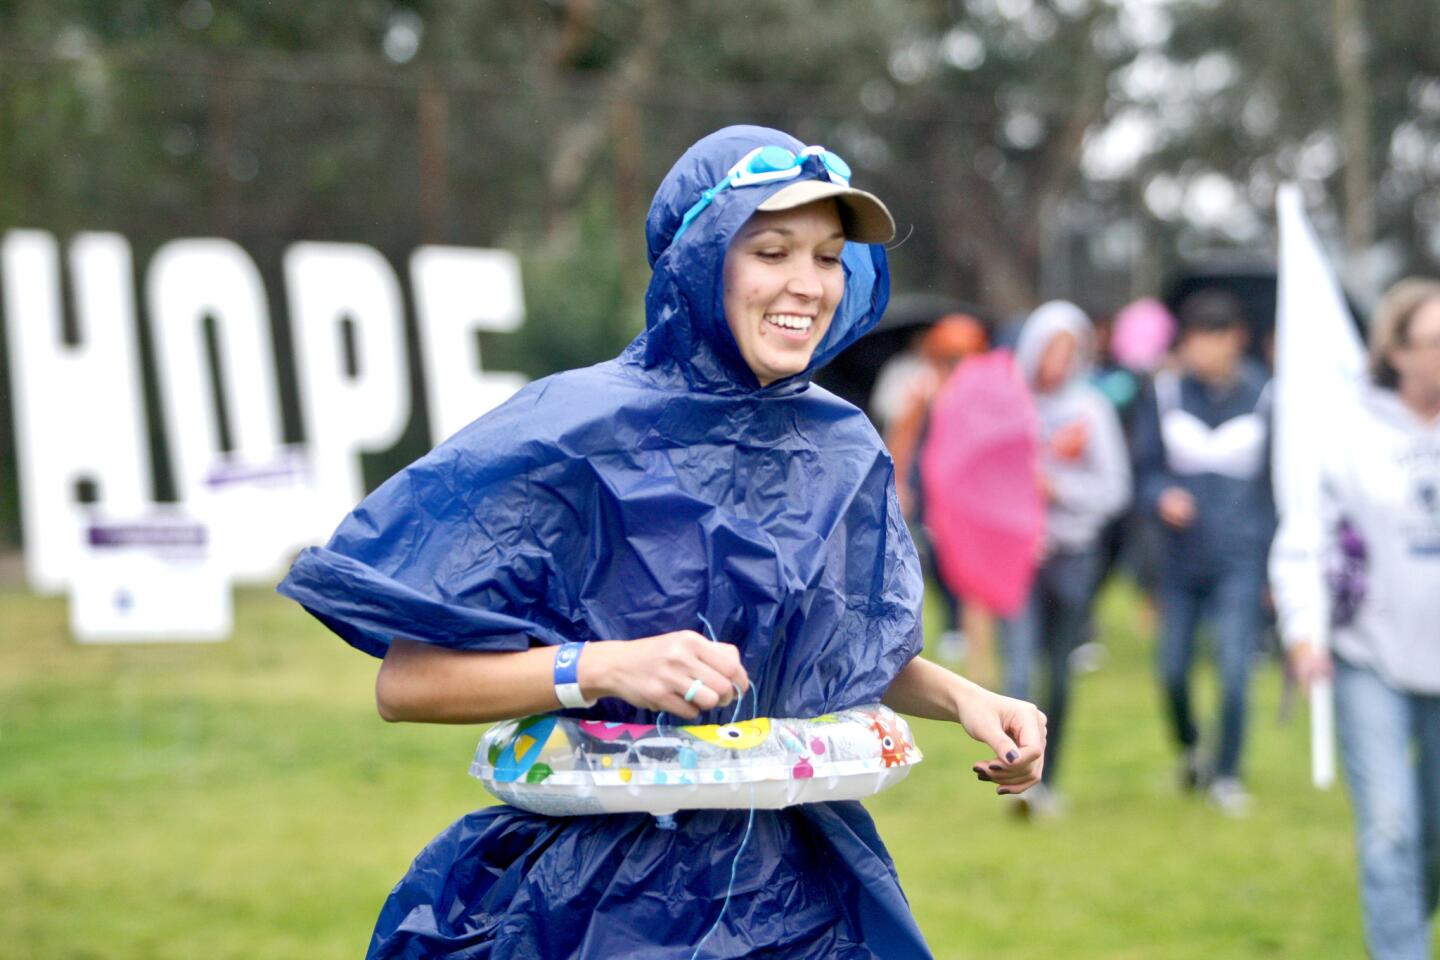 San Diego resident Jenna Olsen, 31, originally from La Crescenta, was ready for the rain at the annual Relay for Life of Foothills held at Clark Magnet High School in La Crescenta on Saturday, April 9, 2016. Olsen and her sister have been doing 26 miles during the walk for 13 years, in honor of their father and marathon runner John Olsen, who passed away in 2007 after a battle with brain cancer. Twenty-six groups signed up for the 24-hour walk to raise money for the American Cancer Society.